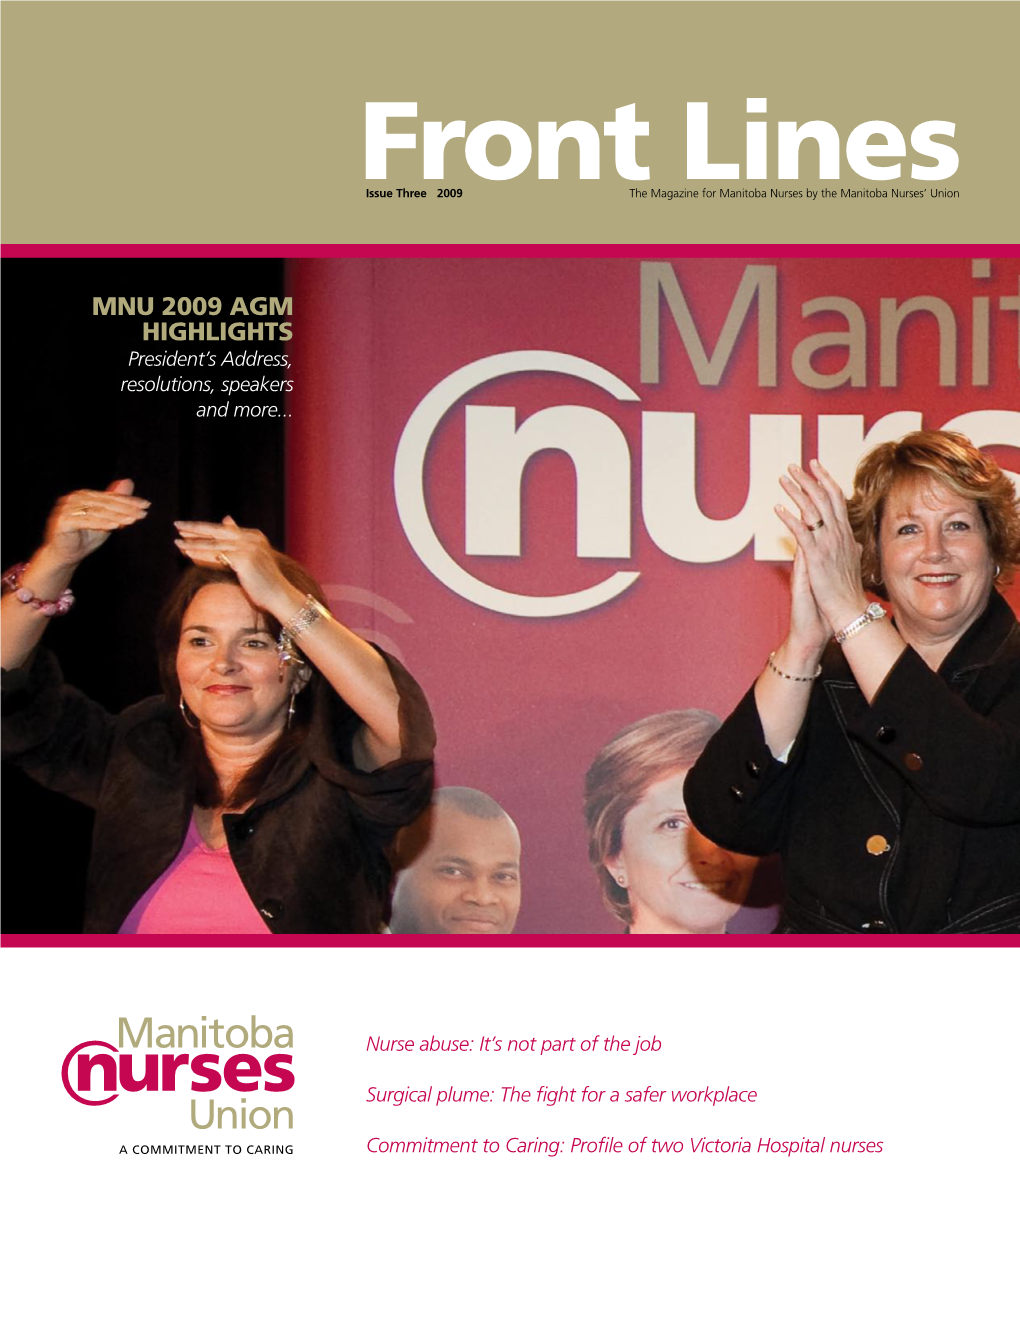 Front Lines Is Published by the Manitoba Nurses’ Union (MNU)